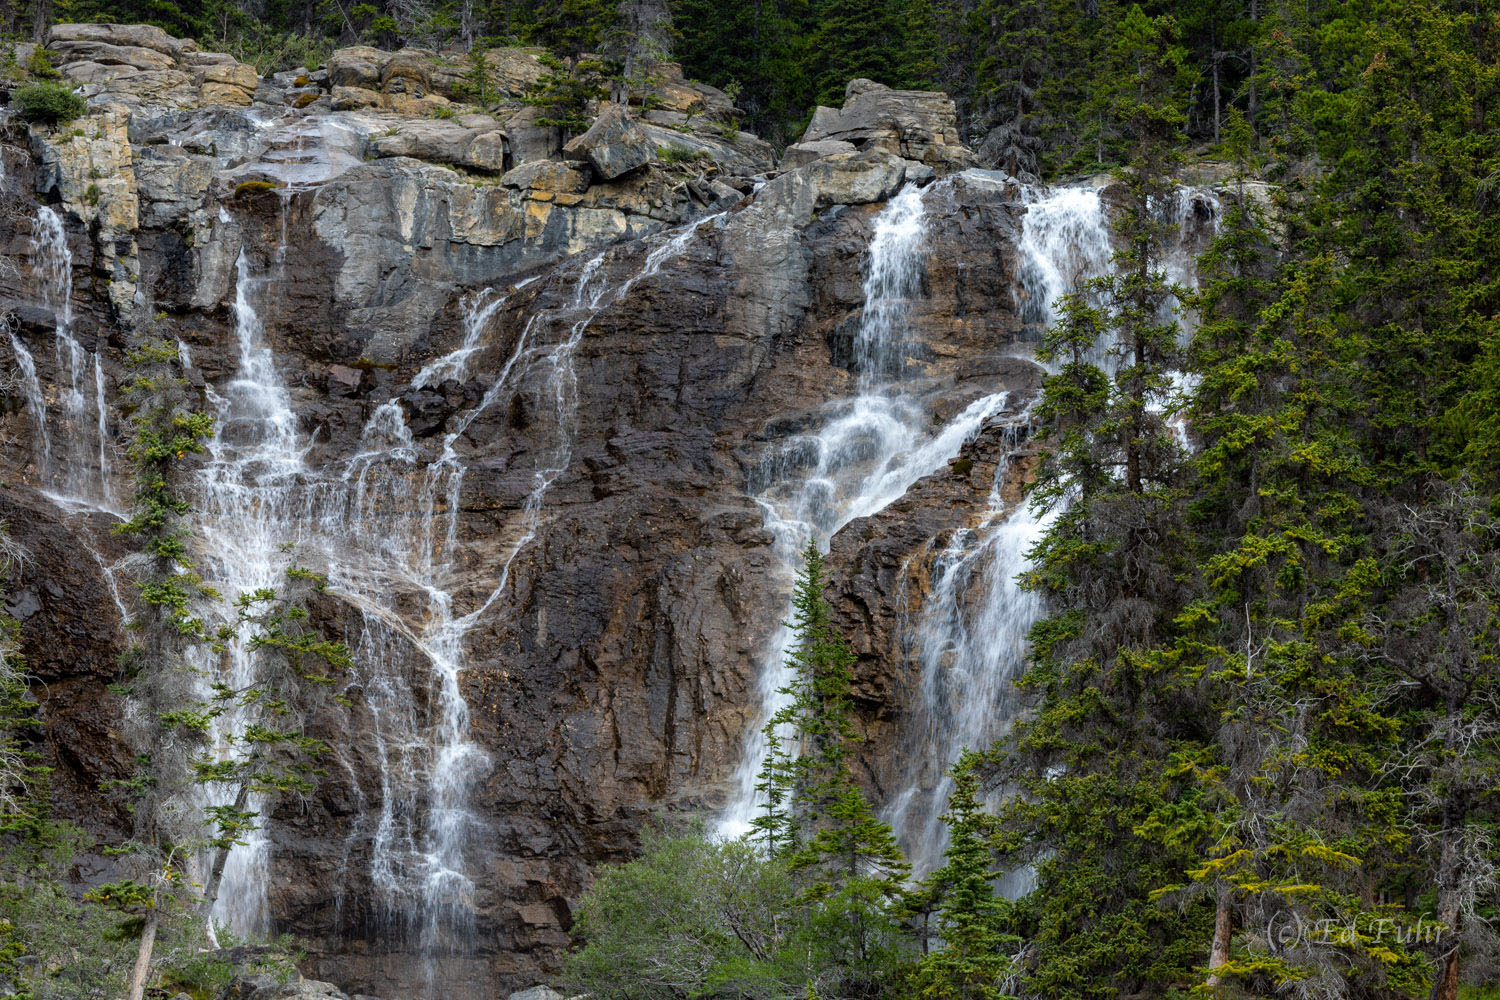 Waters tumbles down from Cirrus Mountain above and the Weeping Wall along the amazing Icefields Parkway.